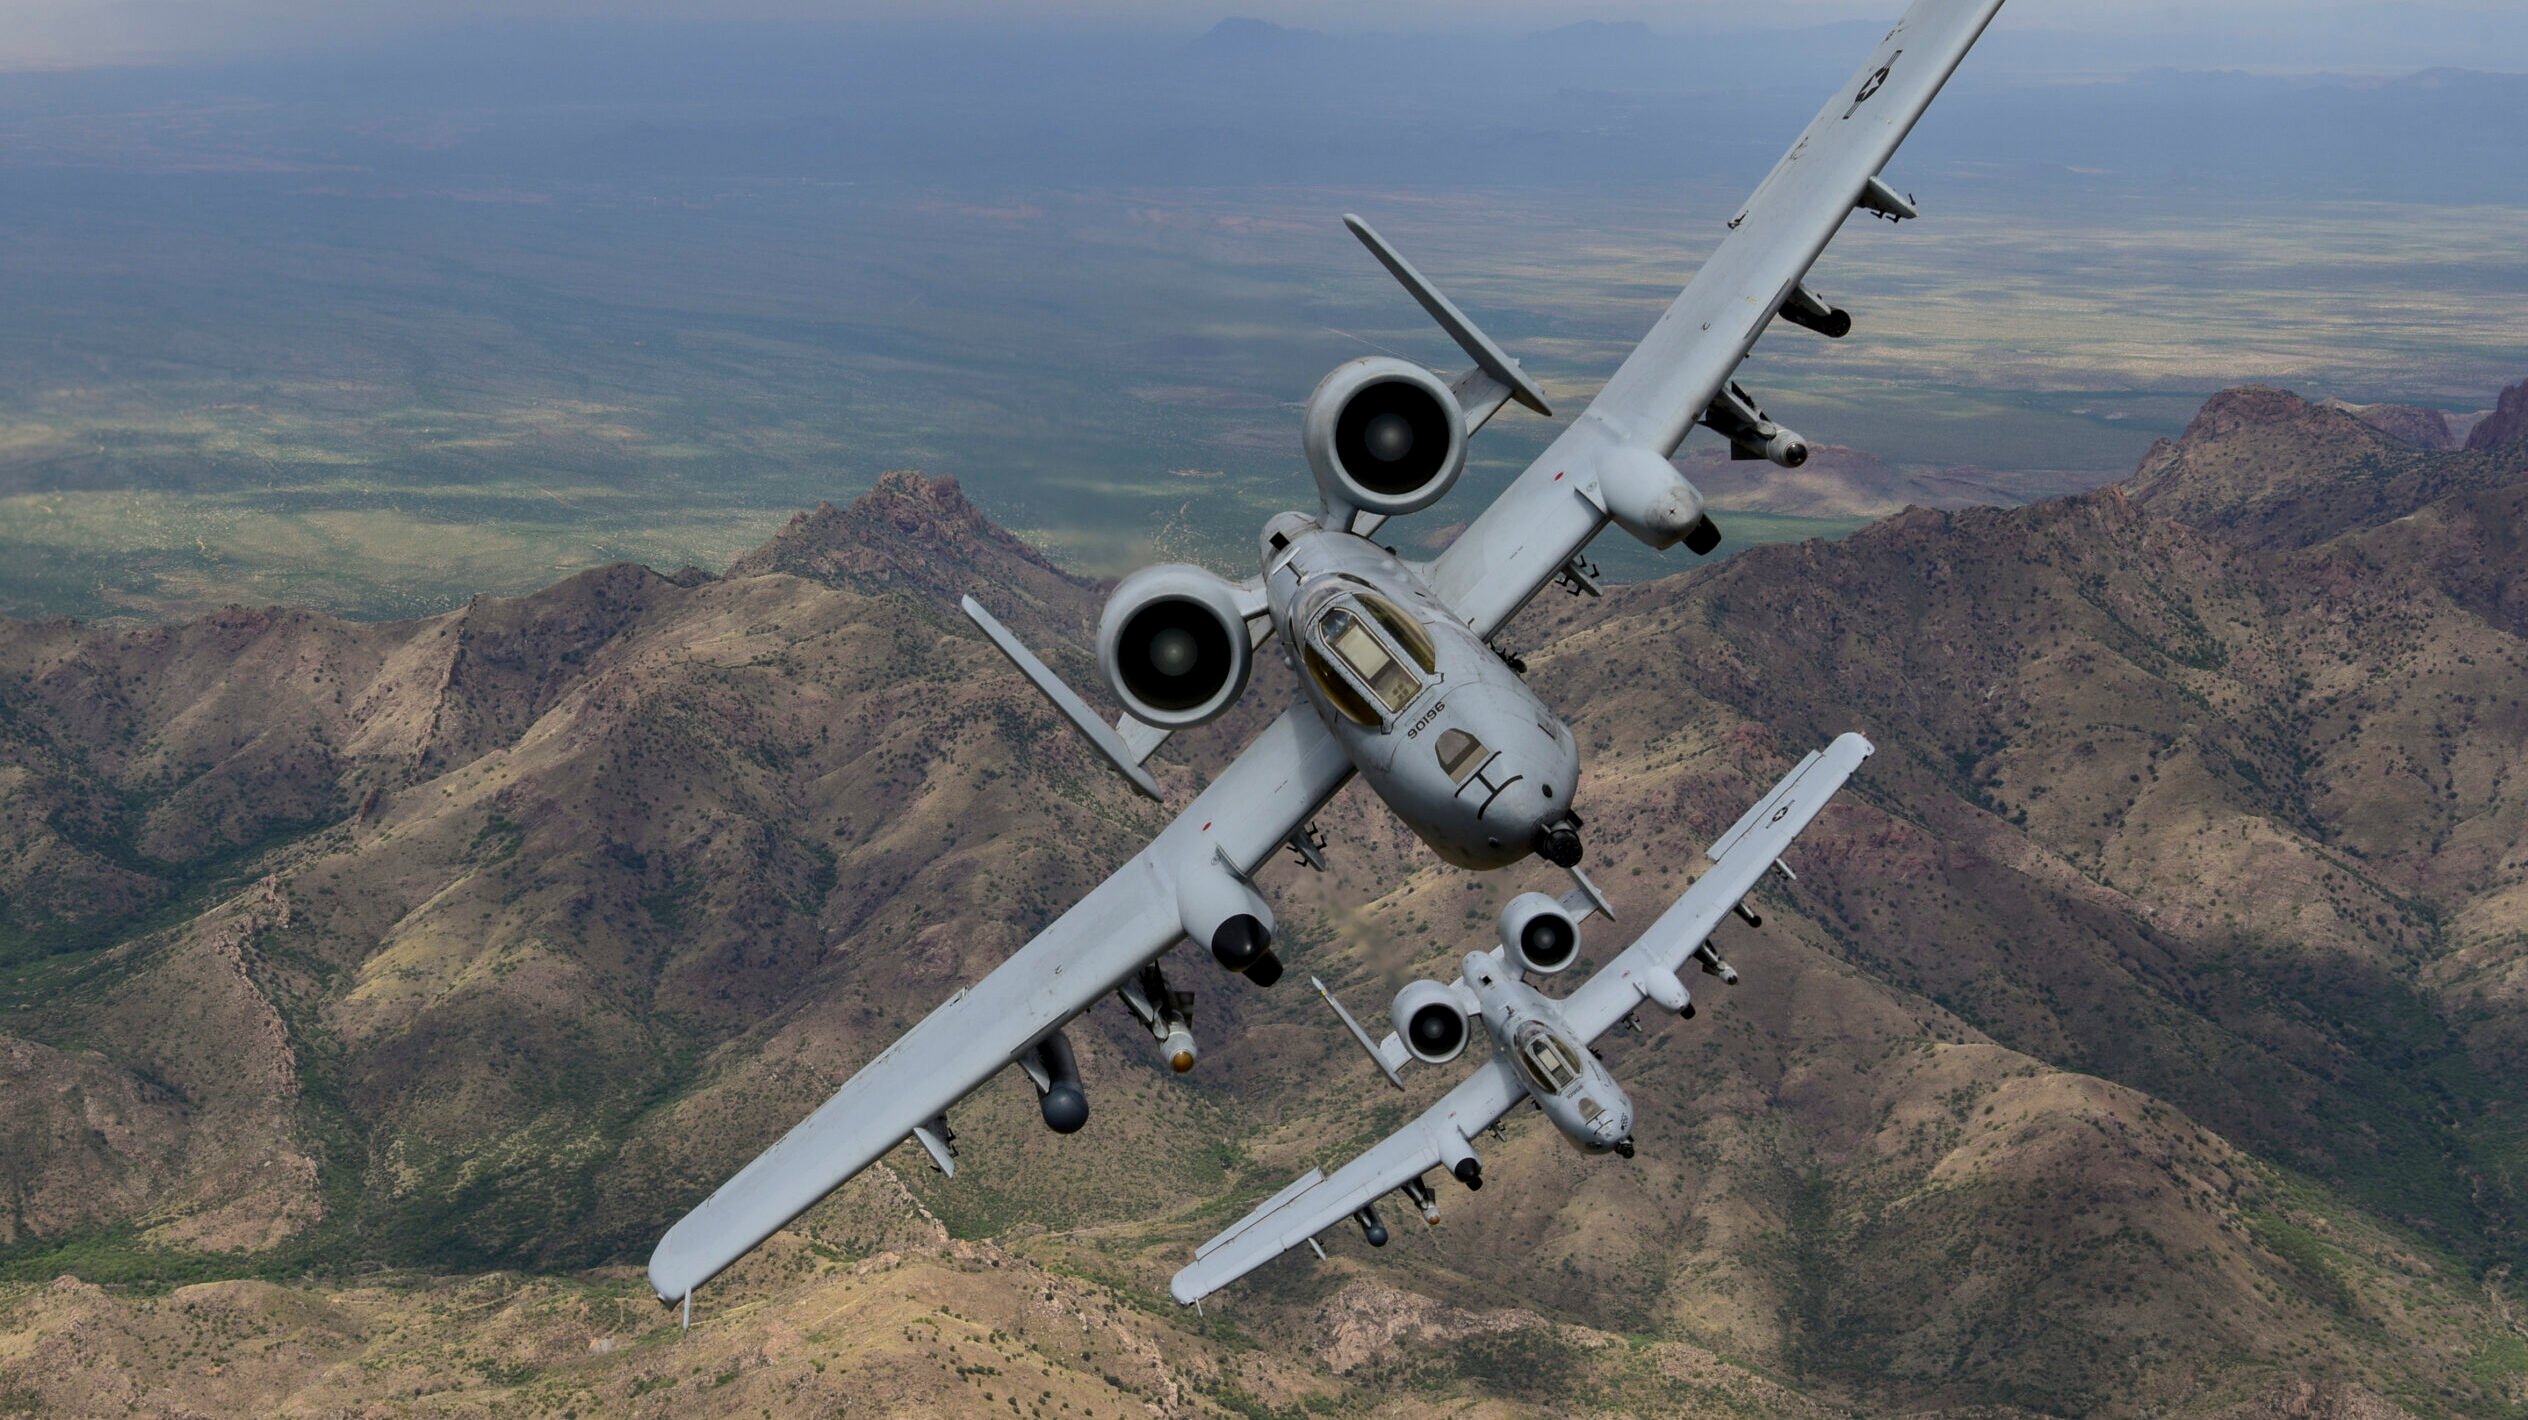 Air Force seeks more A-10 cuts, wants them all retired in 5-6 years - Breaking Defense